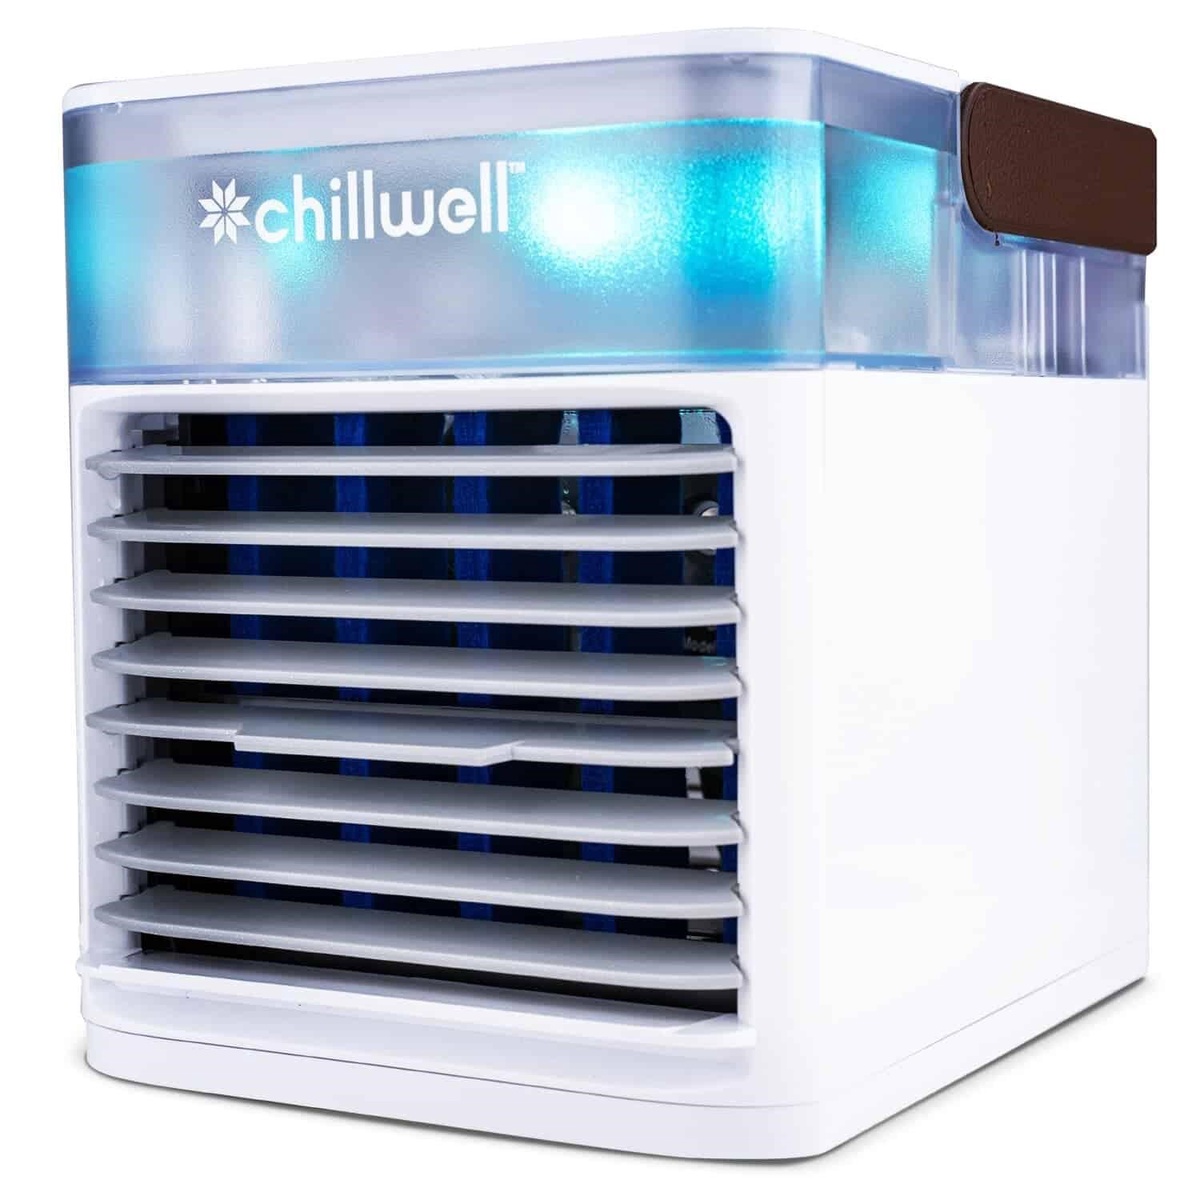 ChillWell Portable AC Reviews (Scam or Fake Brand?) See This Before Buy!